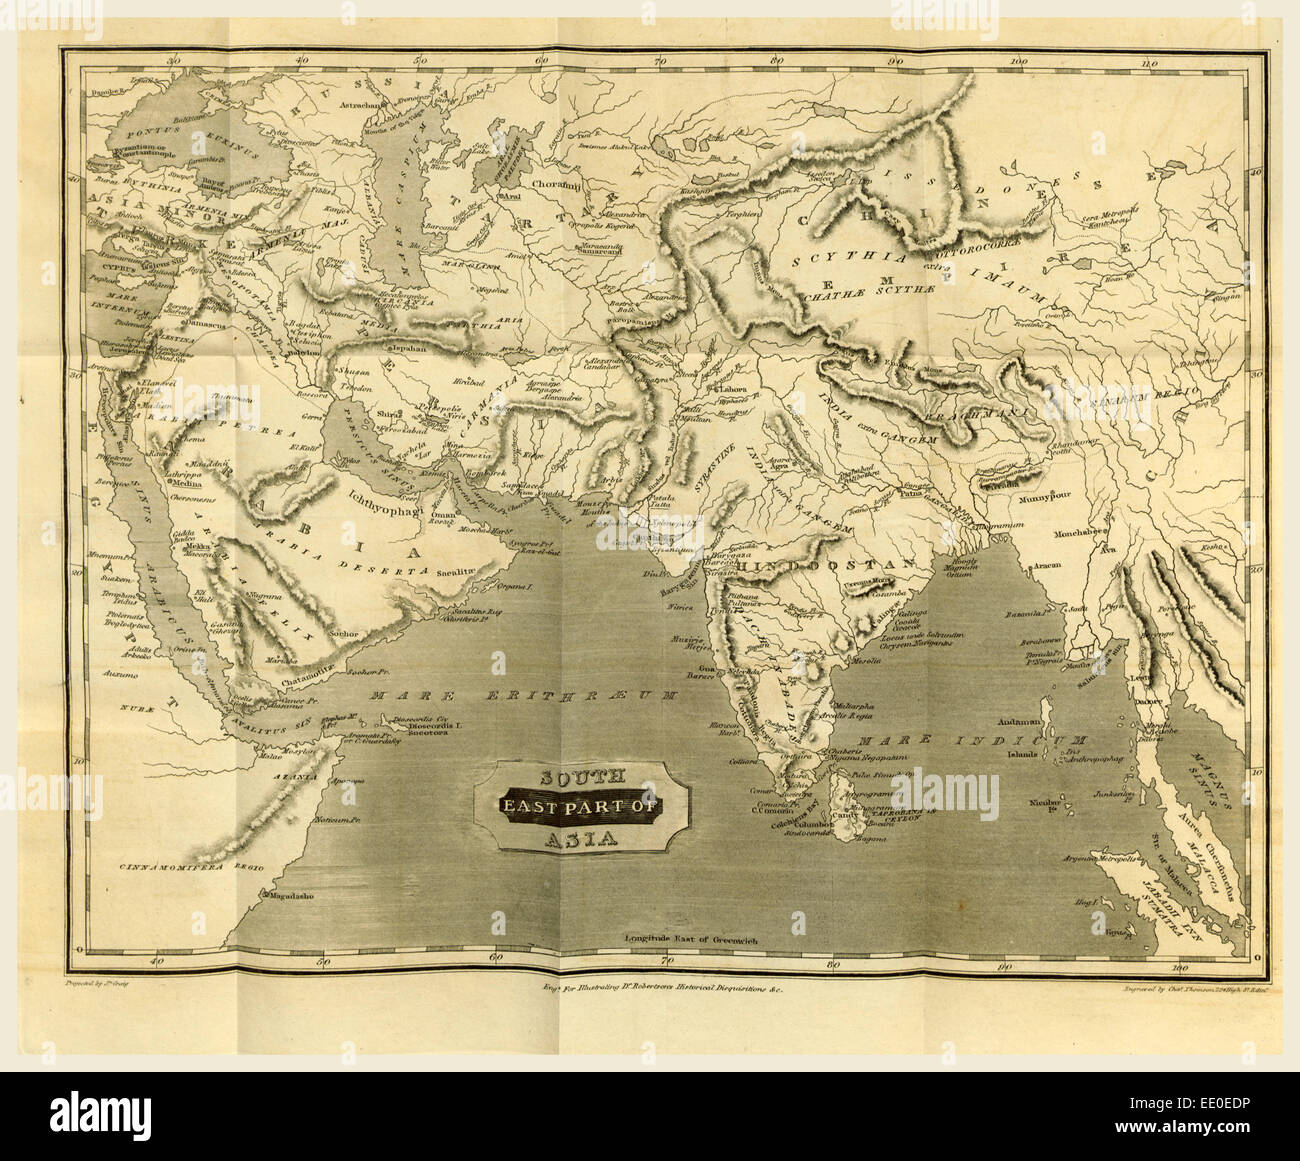 South Asia map, 19th century engraving Stock Photo